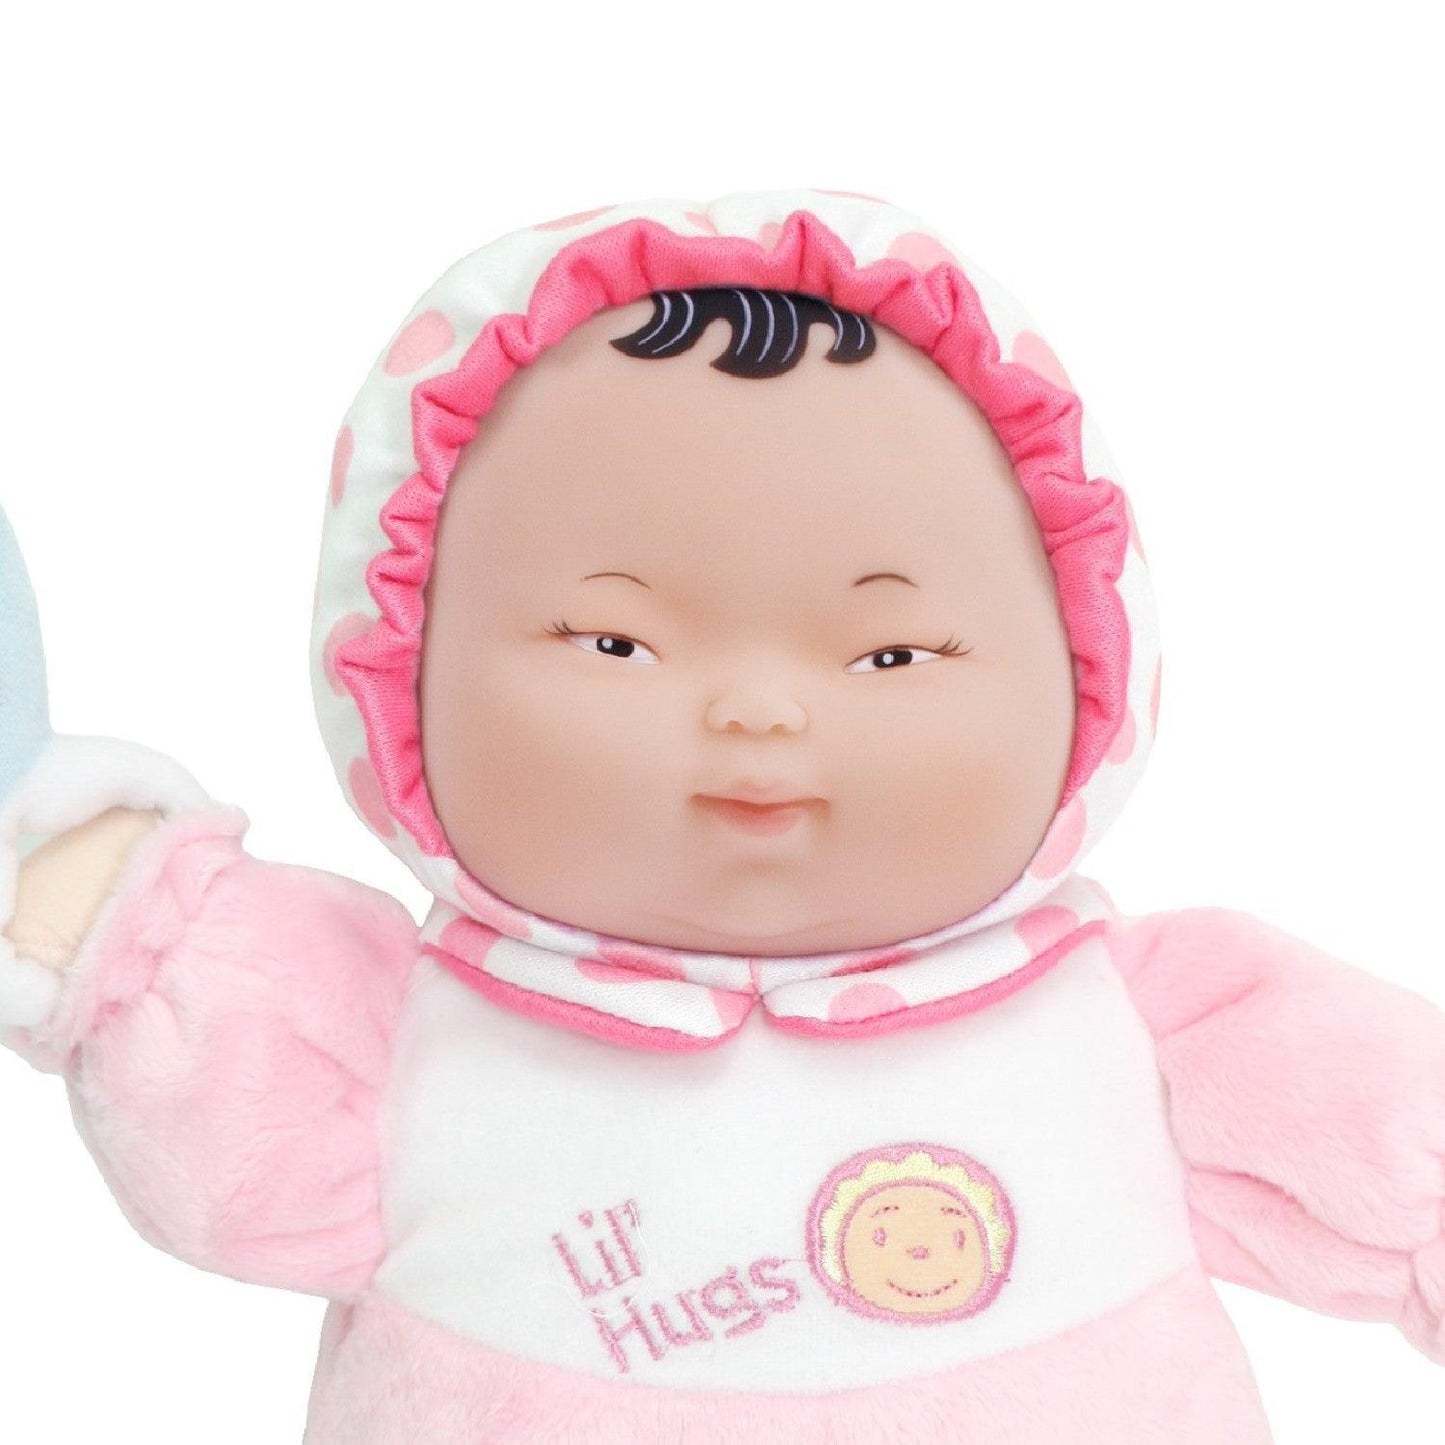 Lil' Hugs 12" Baby's First Doll - Asian - JC Toys Group Inc.